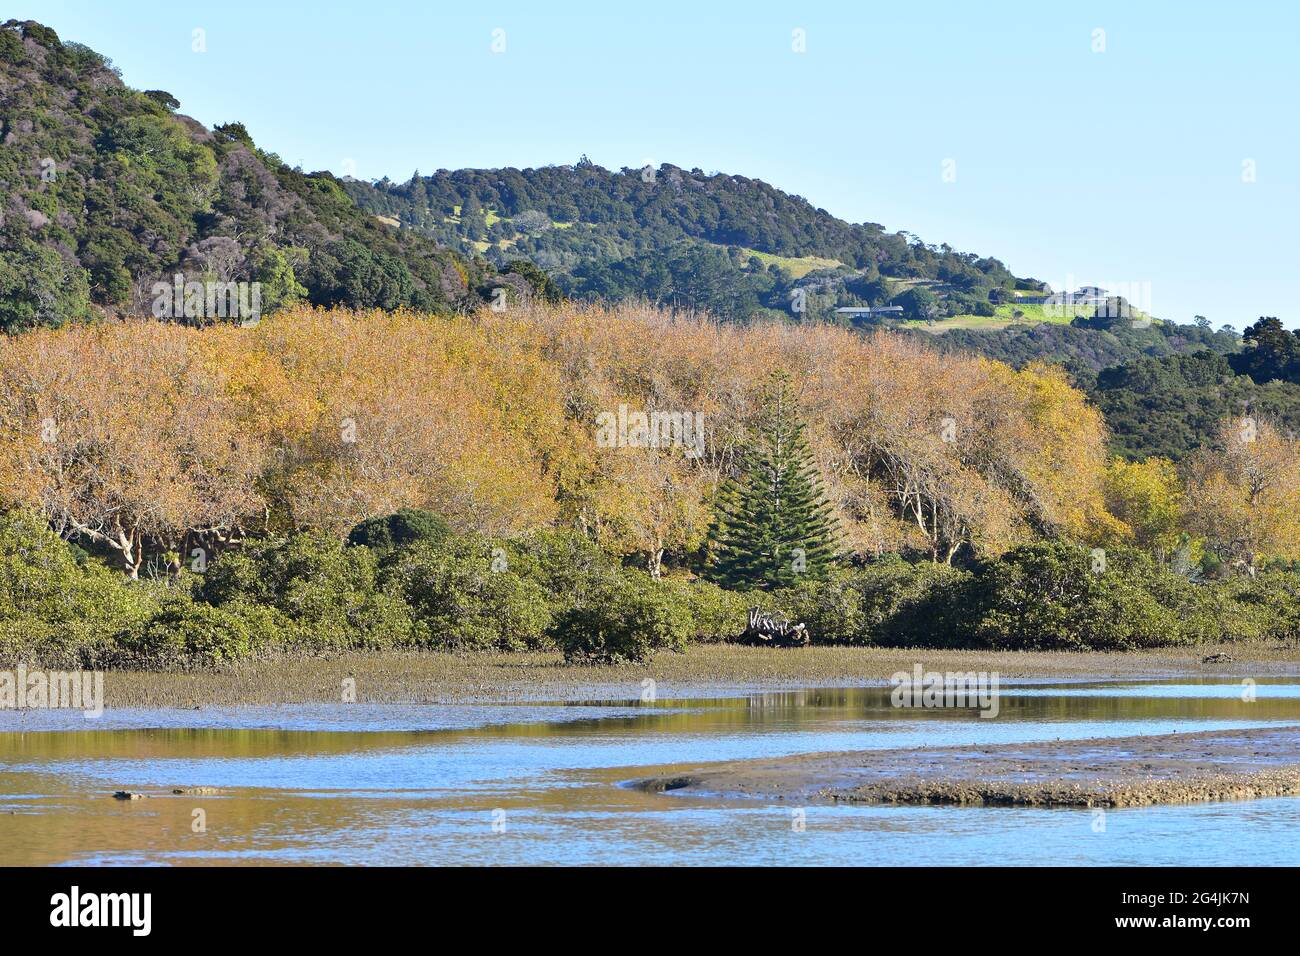 Autumn trees with yellow and brown leaves along coast of shallow estuary with mudflats exposed at low tide. Stock Photo